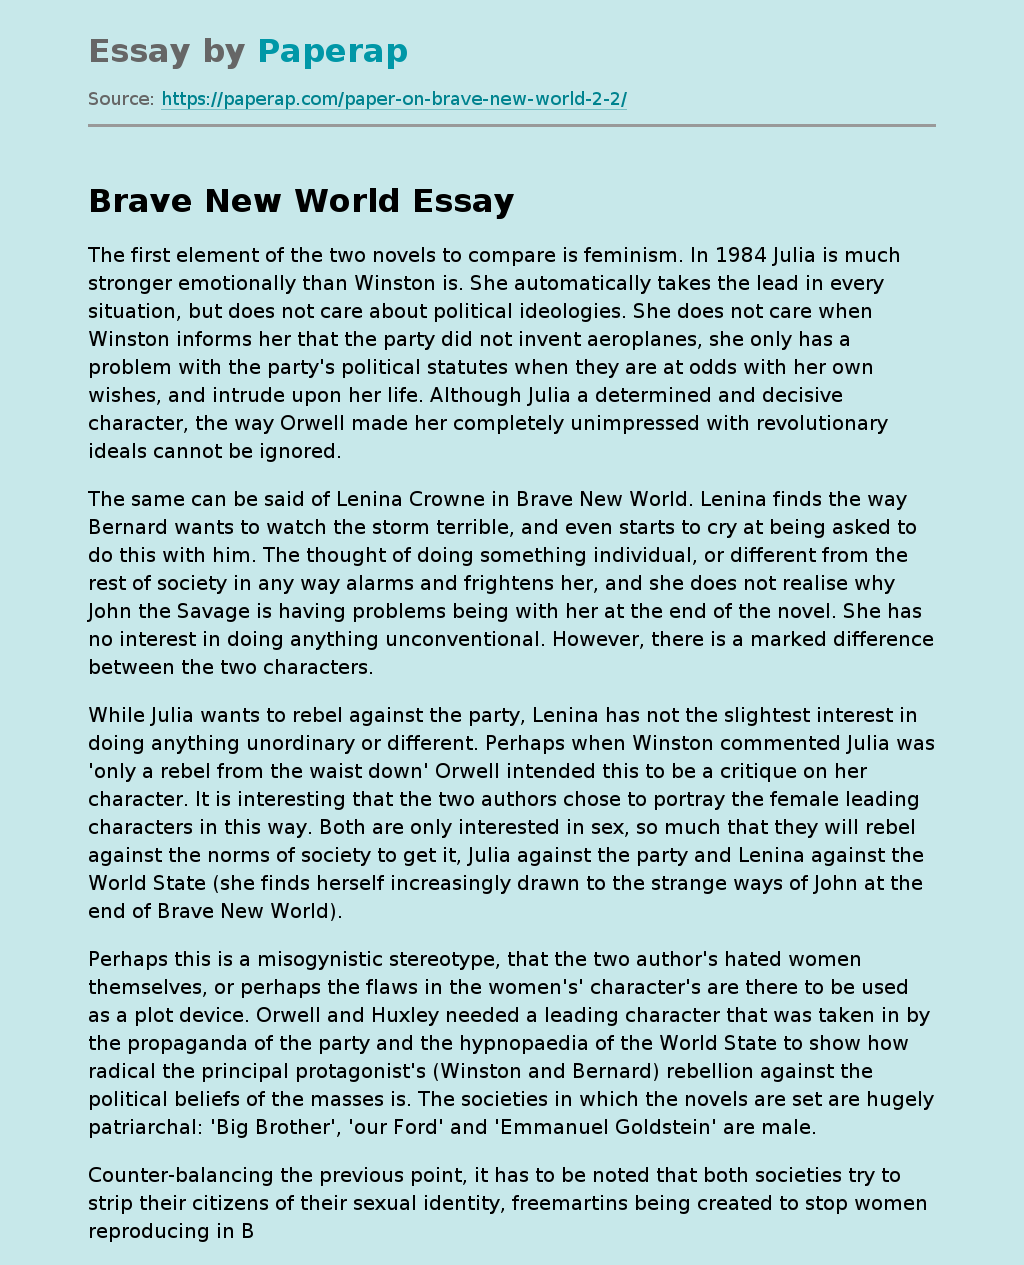 "Brave New World" Is a Dystopian Satirical Novel by Aldous Huxley